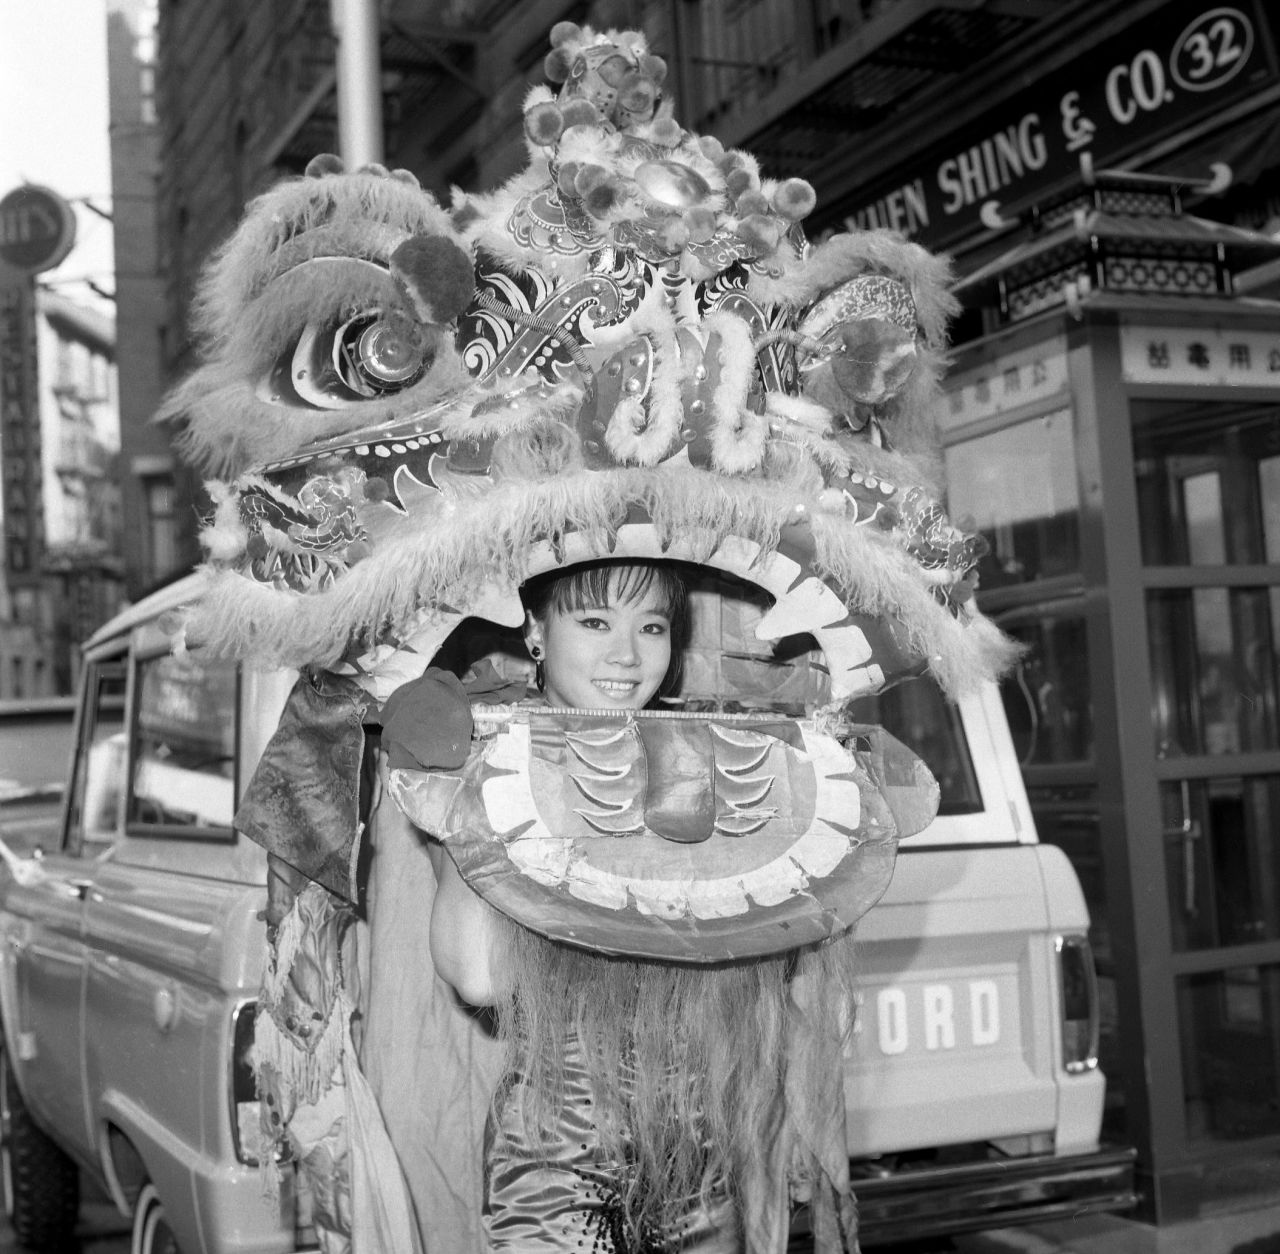 Miss Chinatown Ingrid Van takes part in Chinese New Year fesitivities in New York, date unknown.